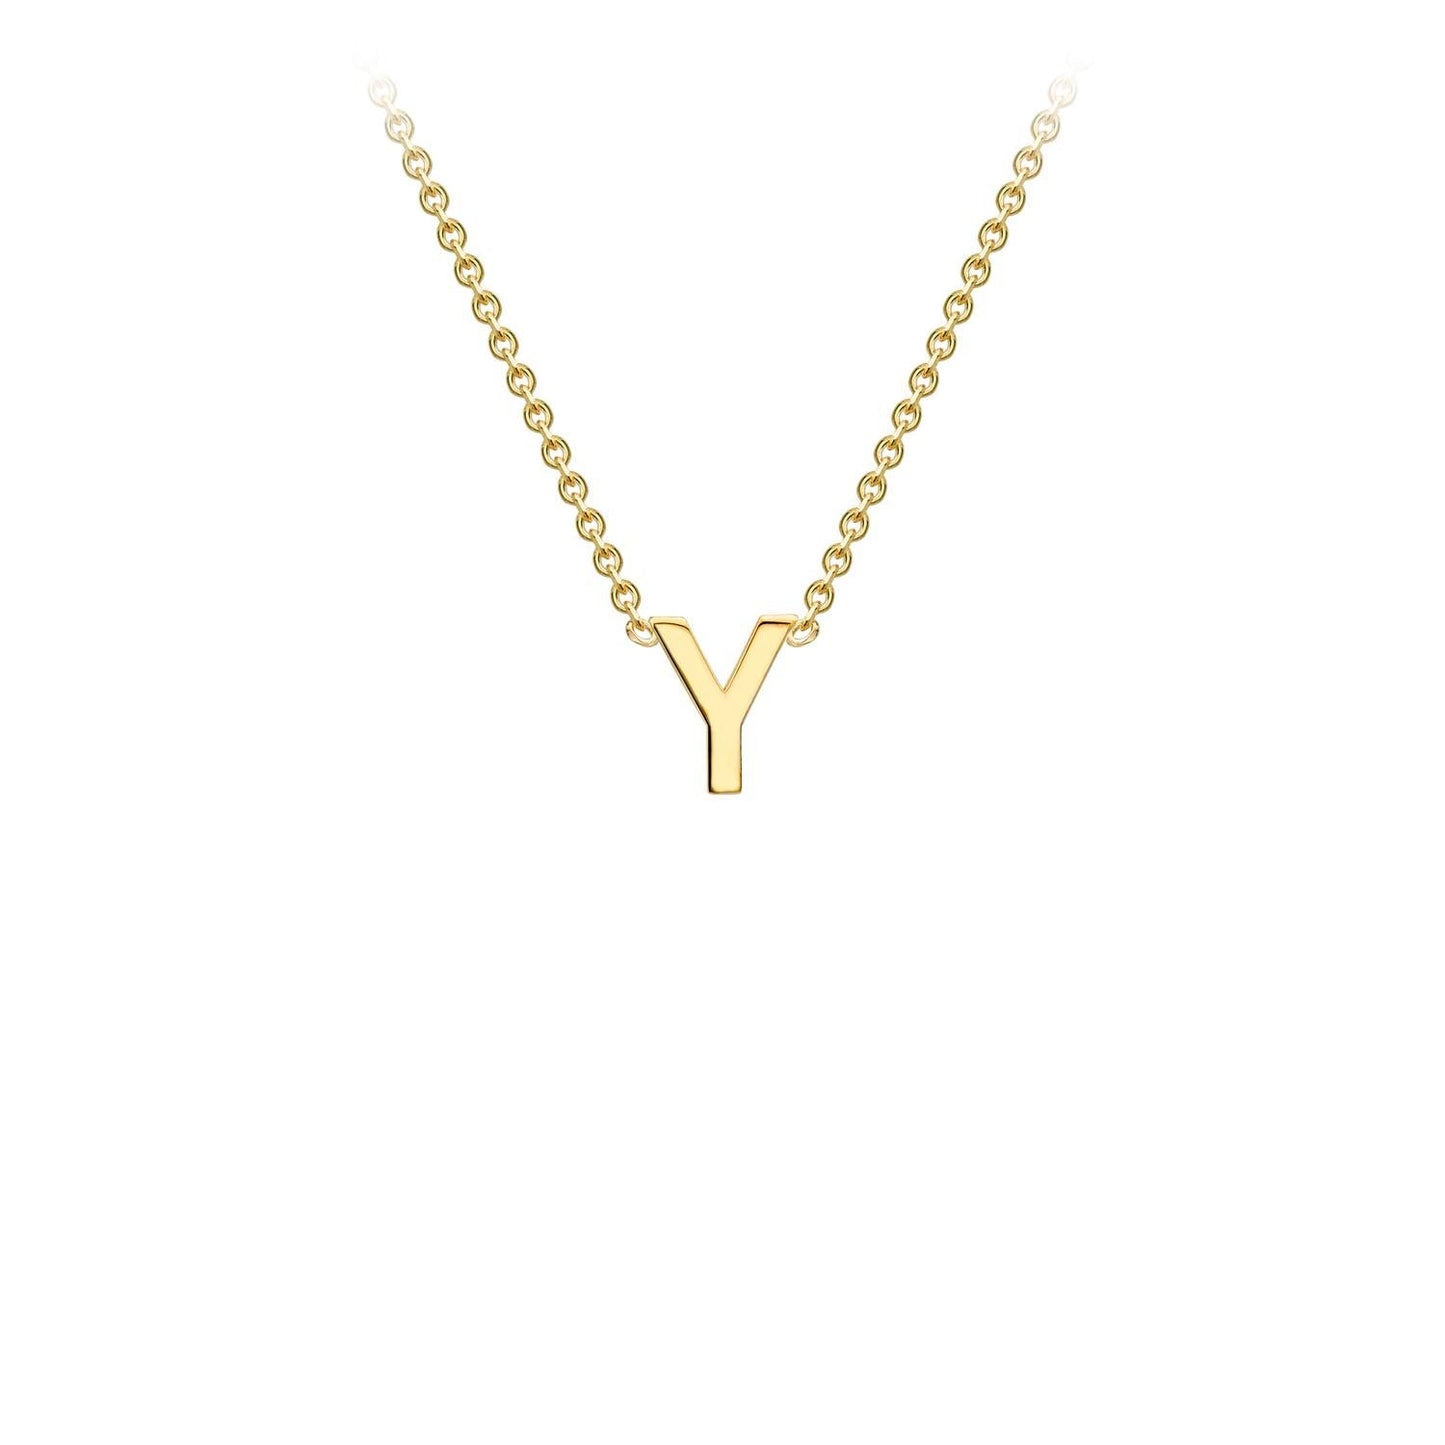 9K Yellow Gold 'Y' Initial Adjustable Letter Necklace 38/43cm